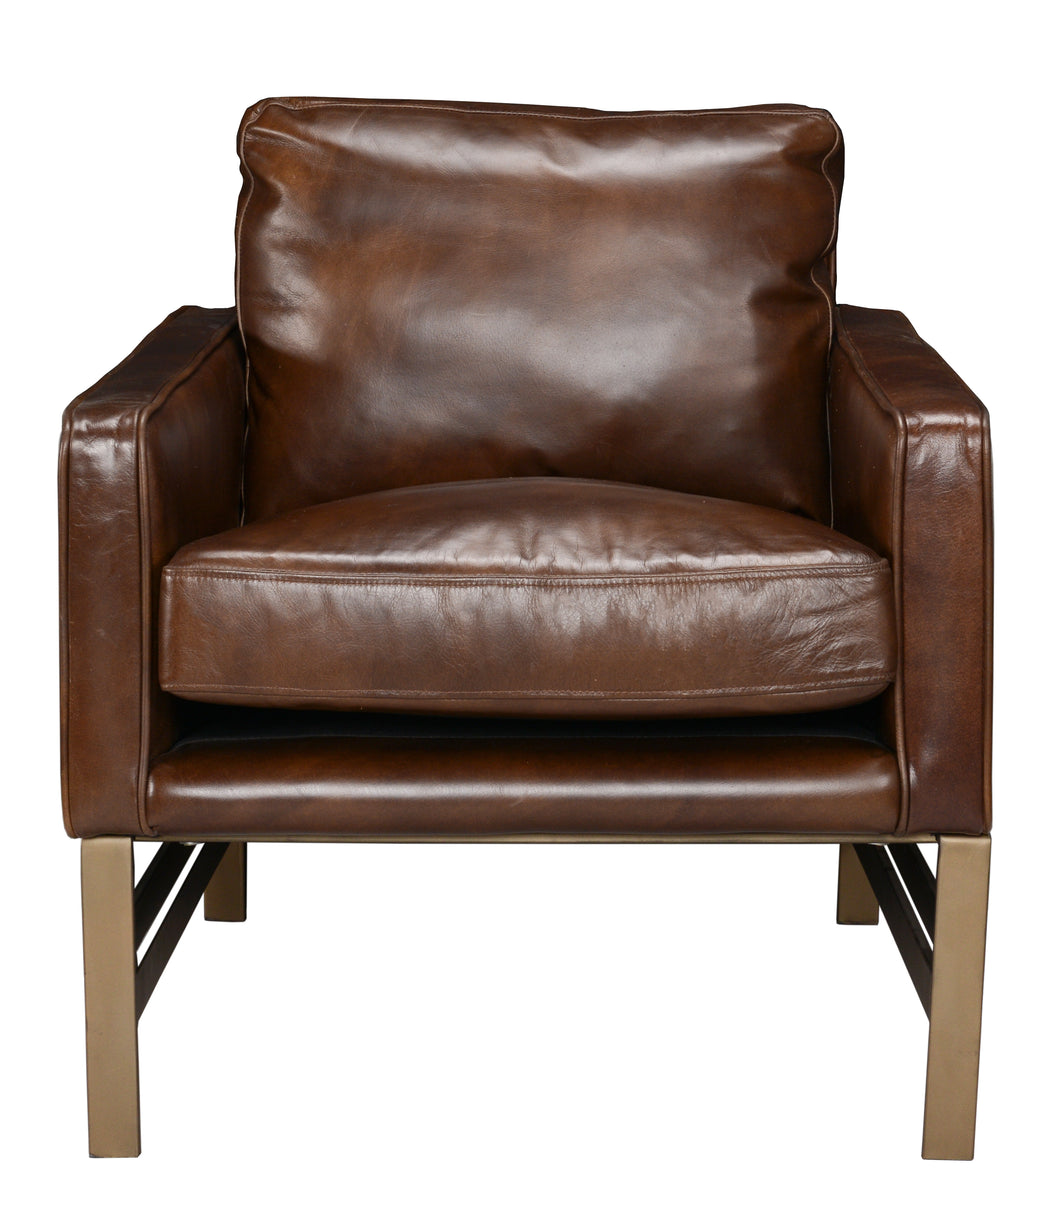 Chazzie Club Accent Chair